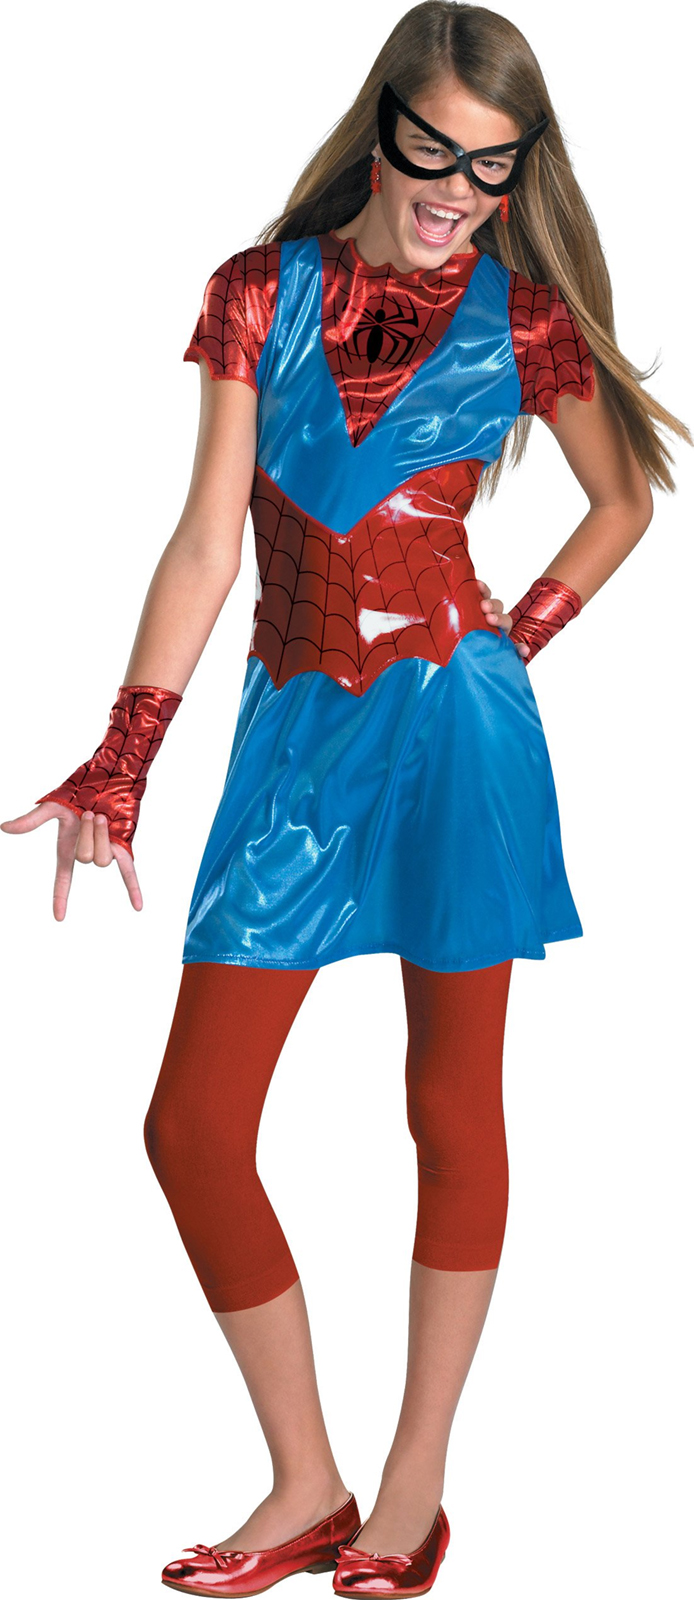 Disguise Inc Women's Spider-Girl Child Costume - Red/Blue - 7-9